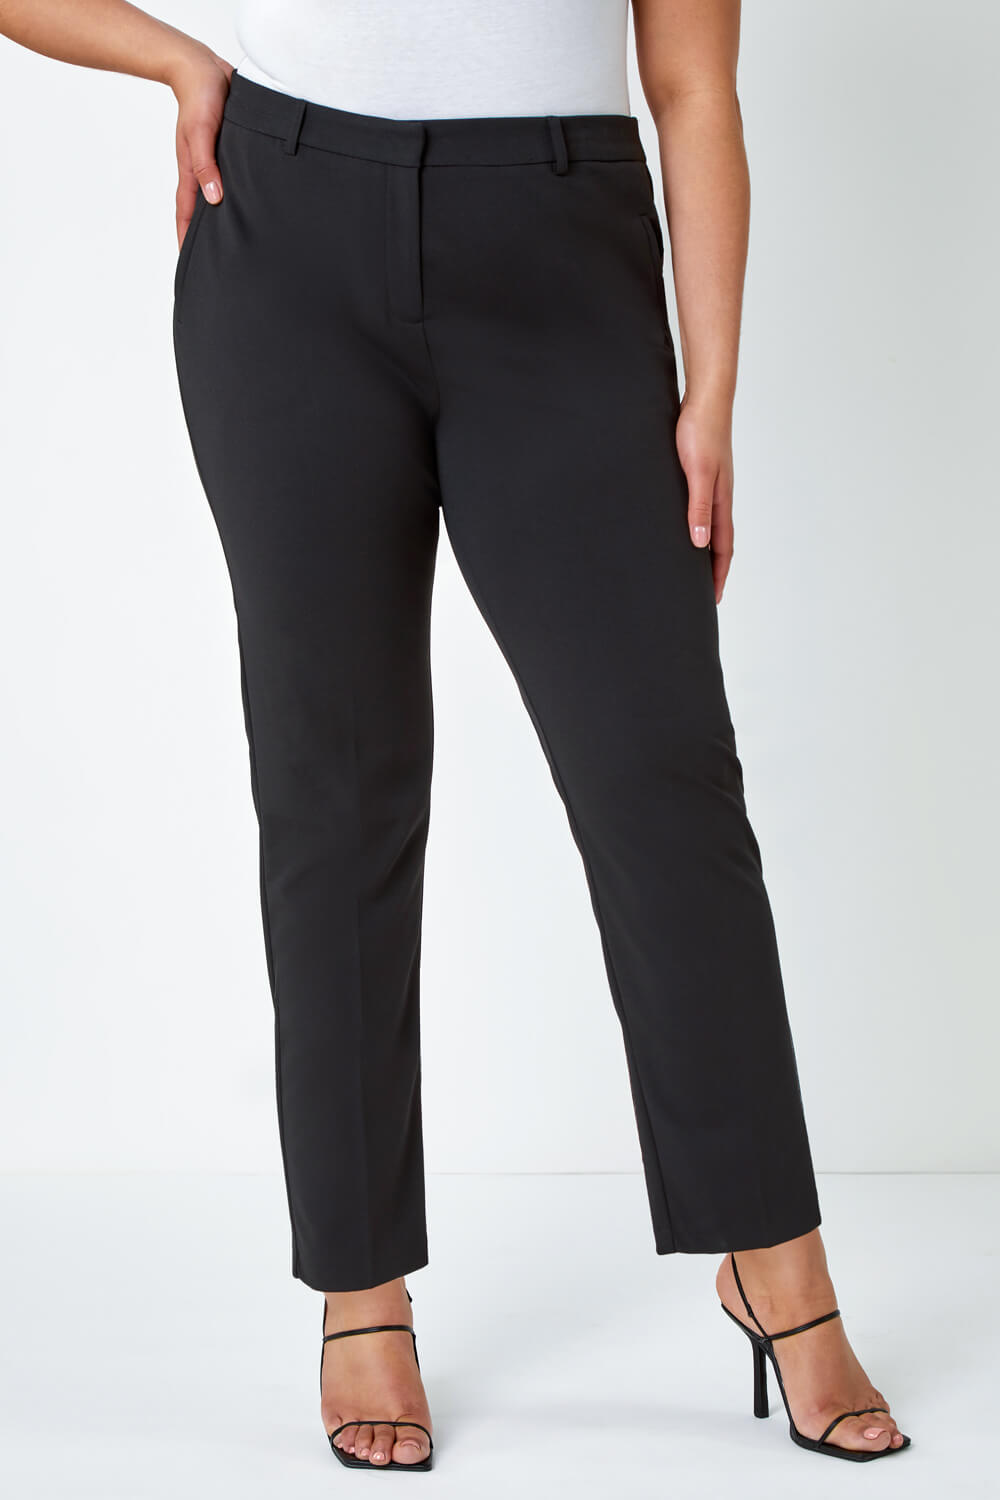 Black Curve Straight Smart Trousers, Image 4 of 6